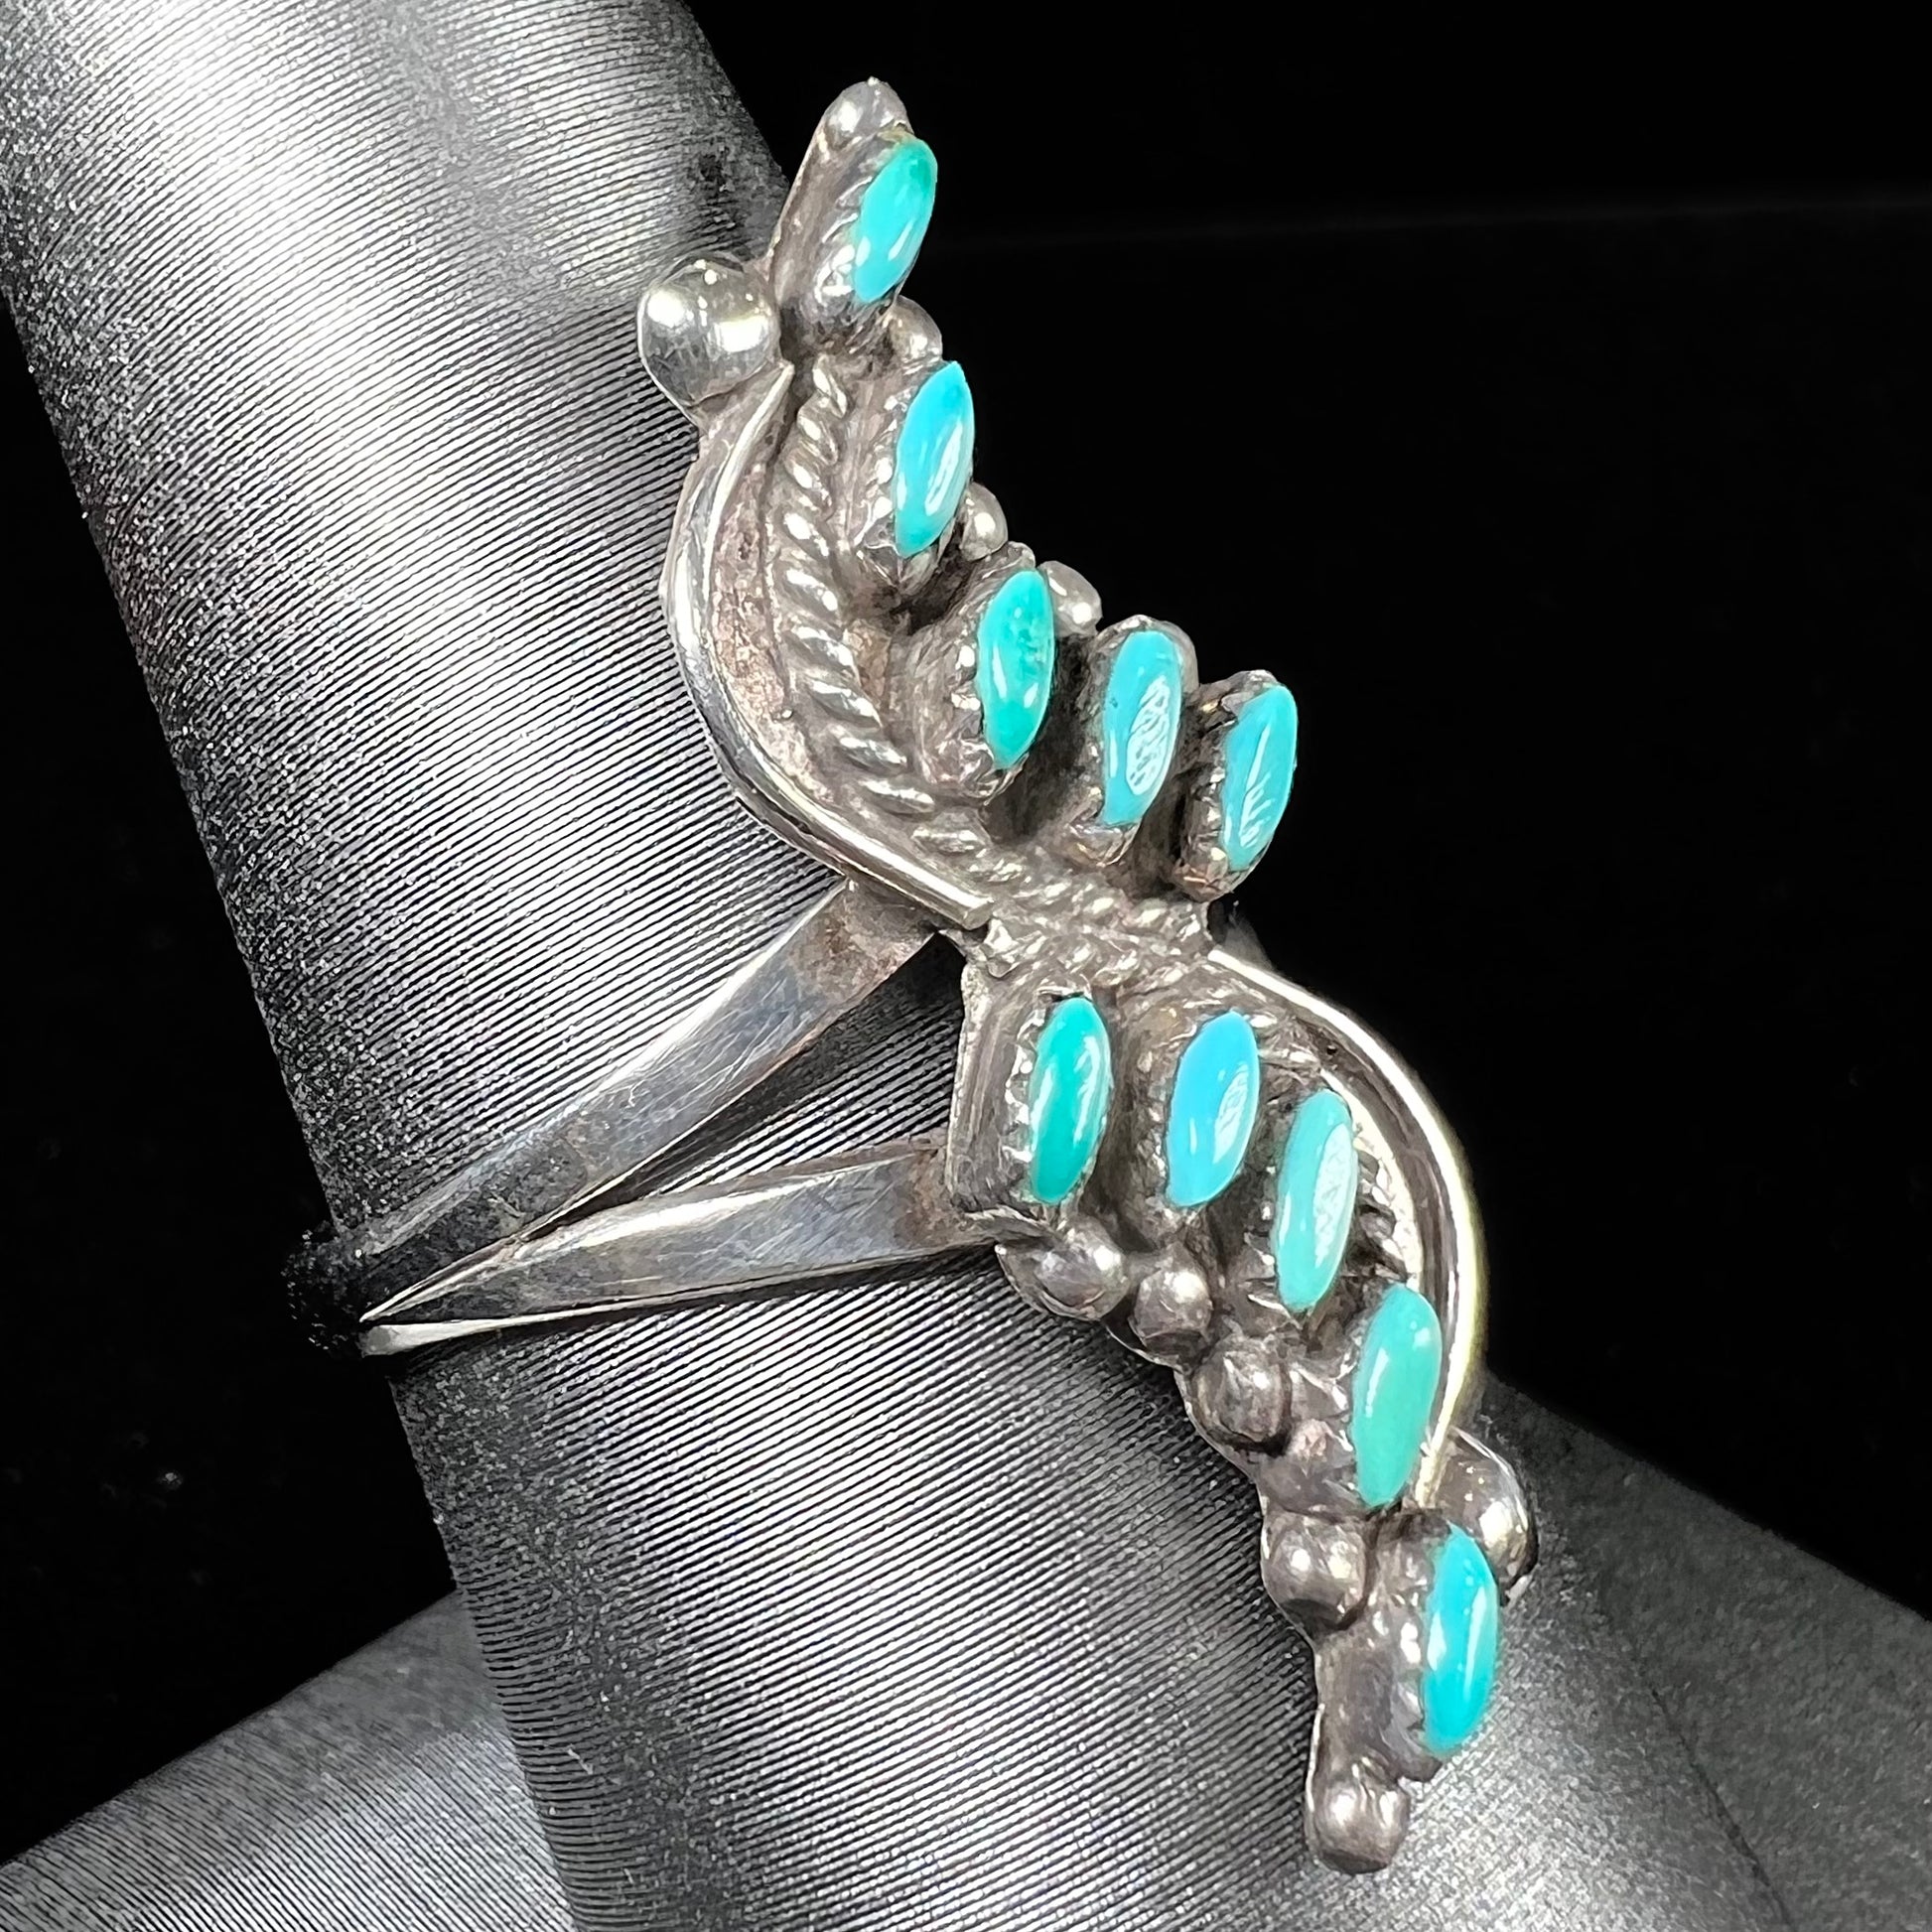 A Zuni needlepoint turquoise ring set in sterling silver.